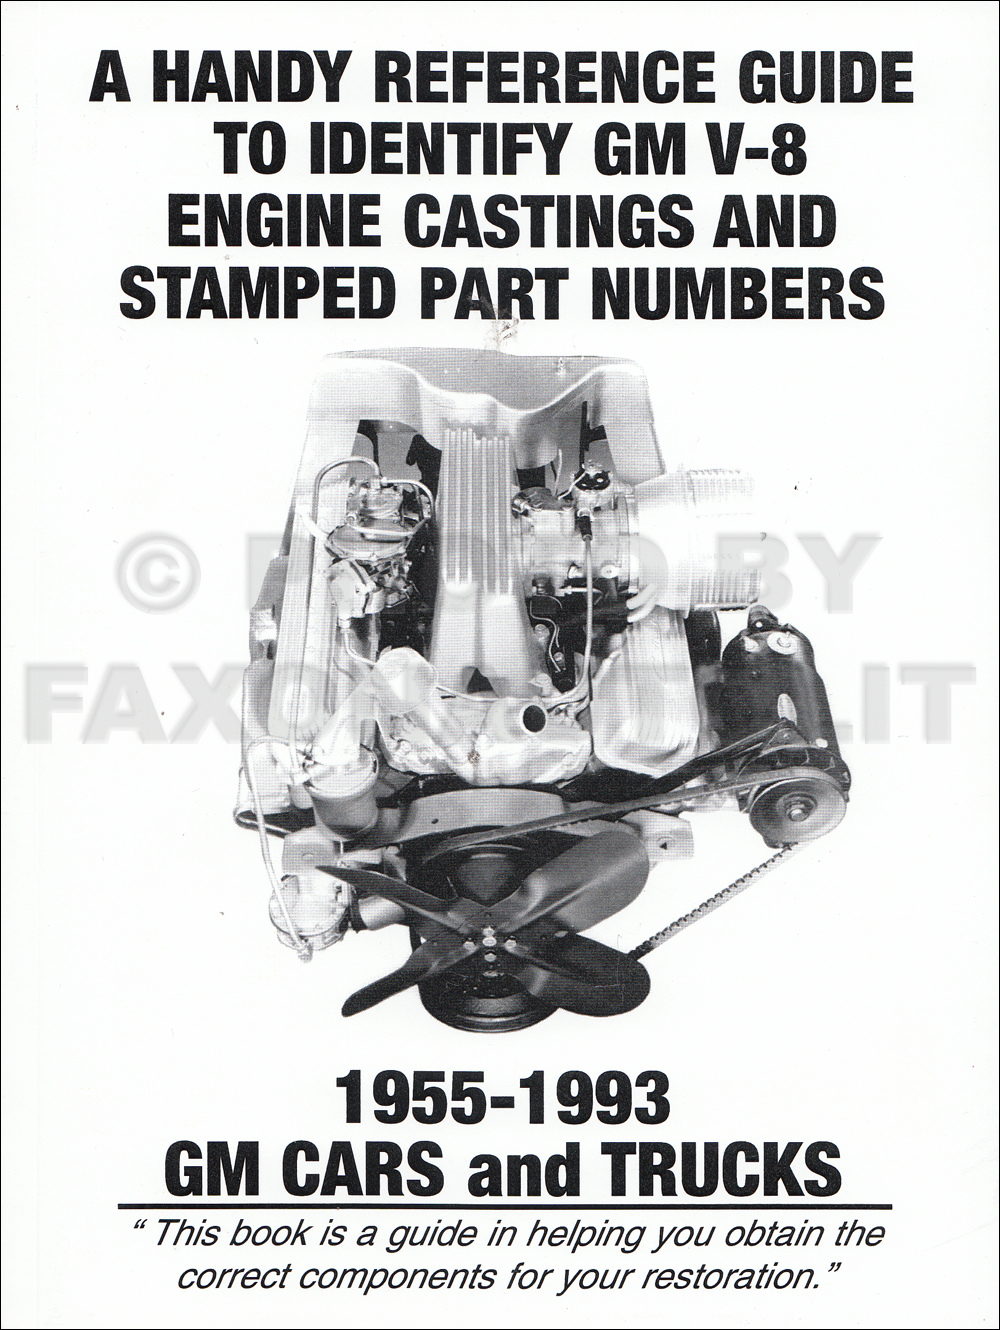 1955-1993 Handy Reference Guide to Identify Chevy V-8 Engine Castings and Stamped Part Numbers